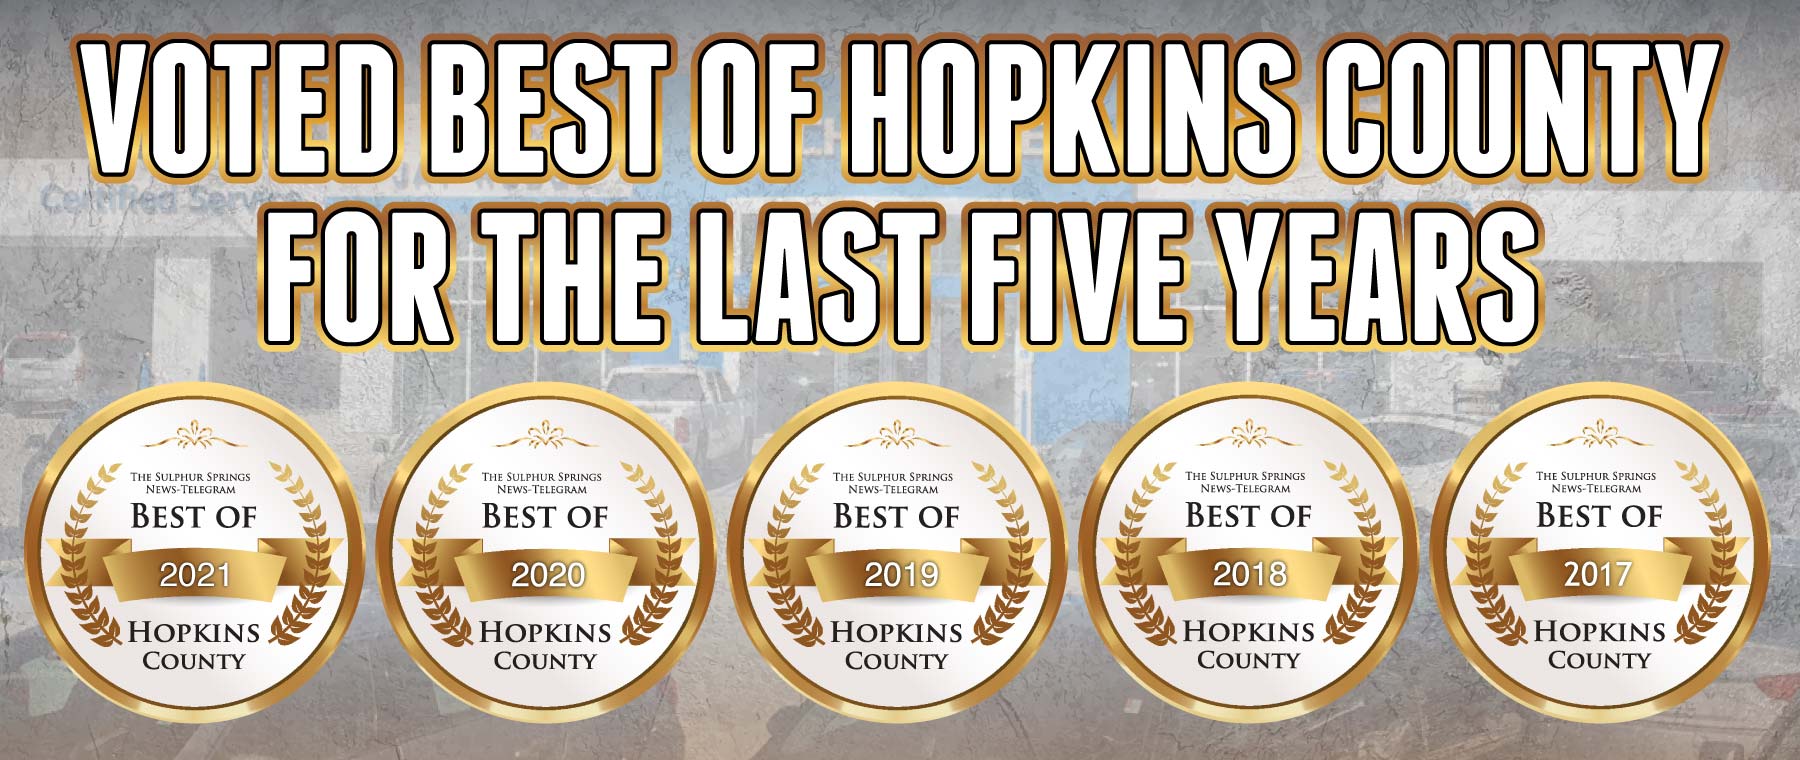 Voted Best of Hopkins County for the last Five Years